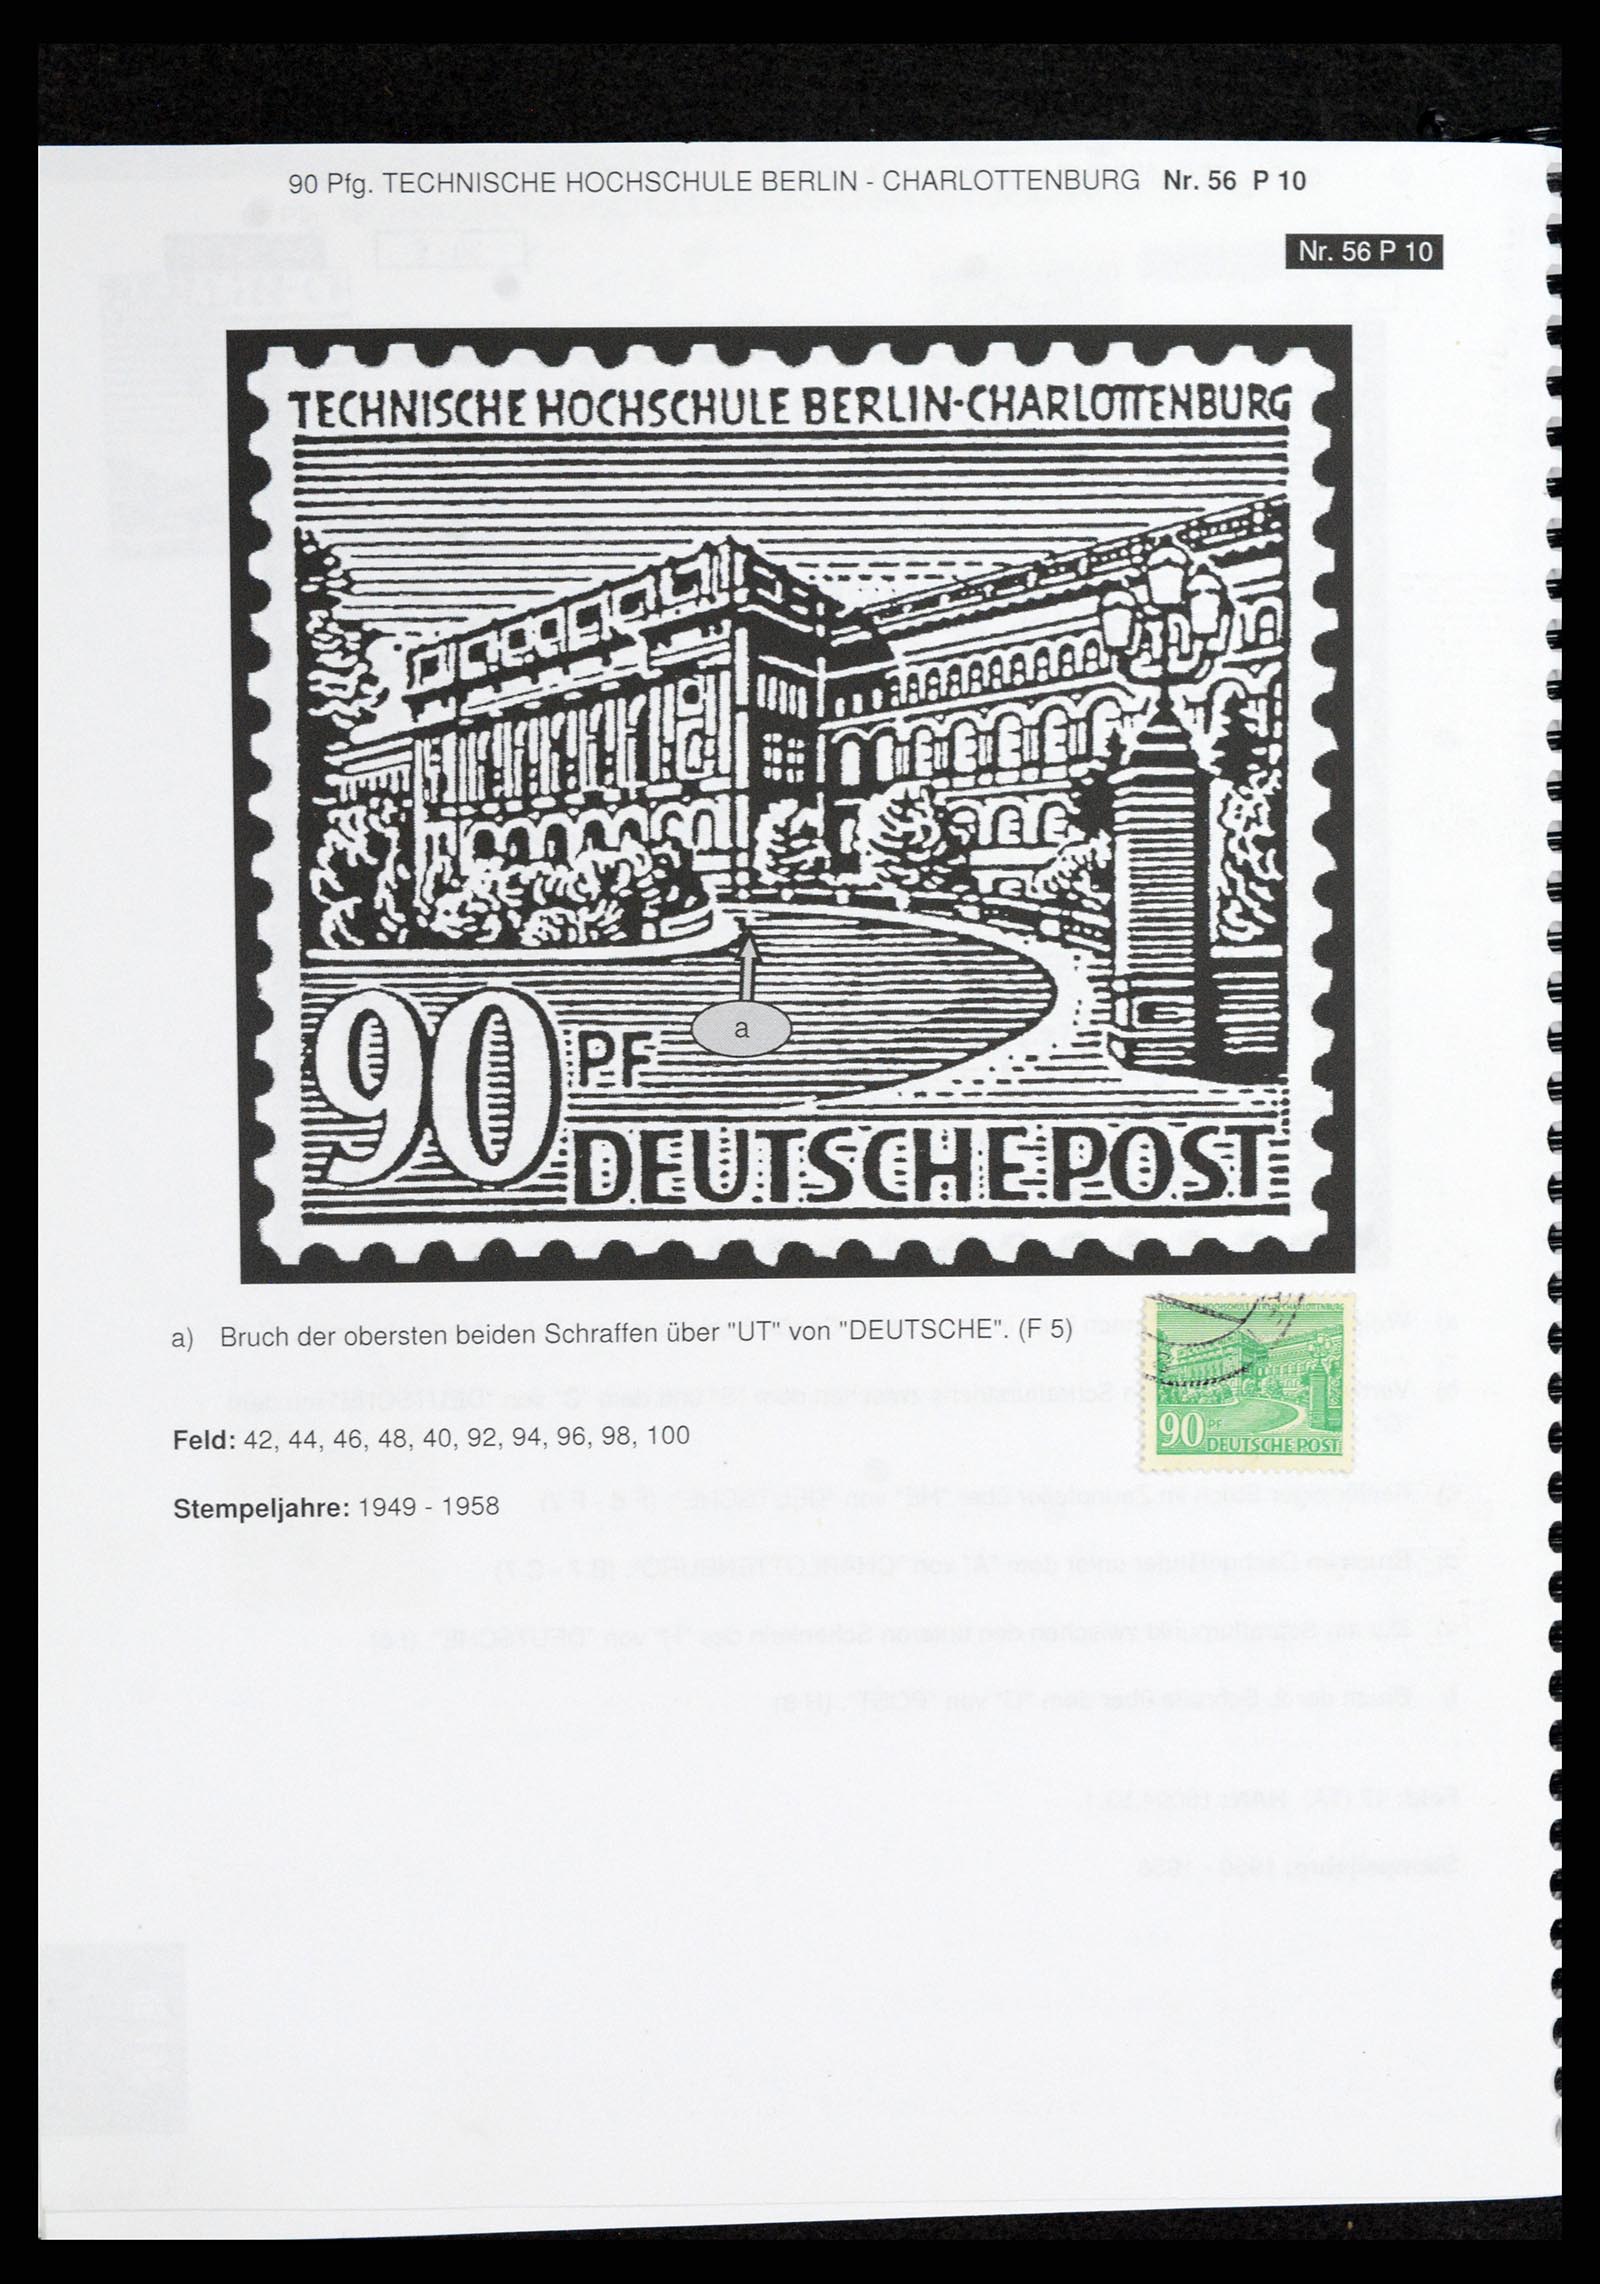 37458 568 - Stamp collection 37458 Berlin plateflaws 1949.